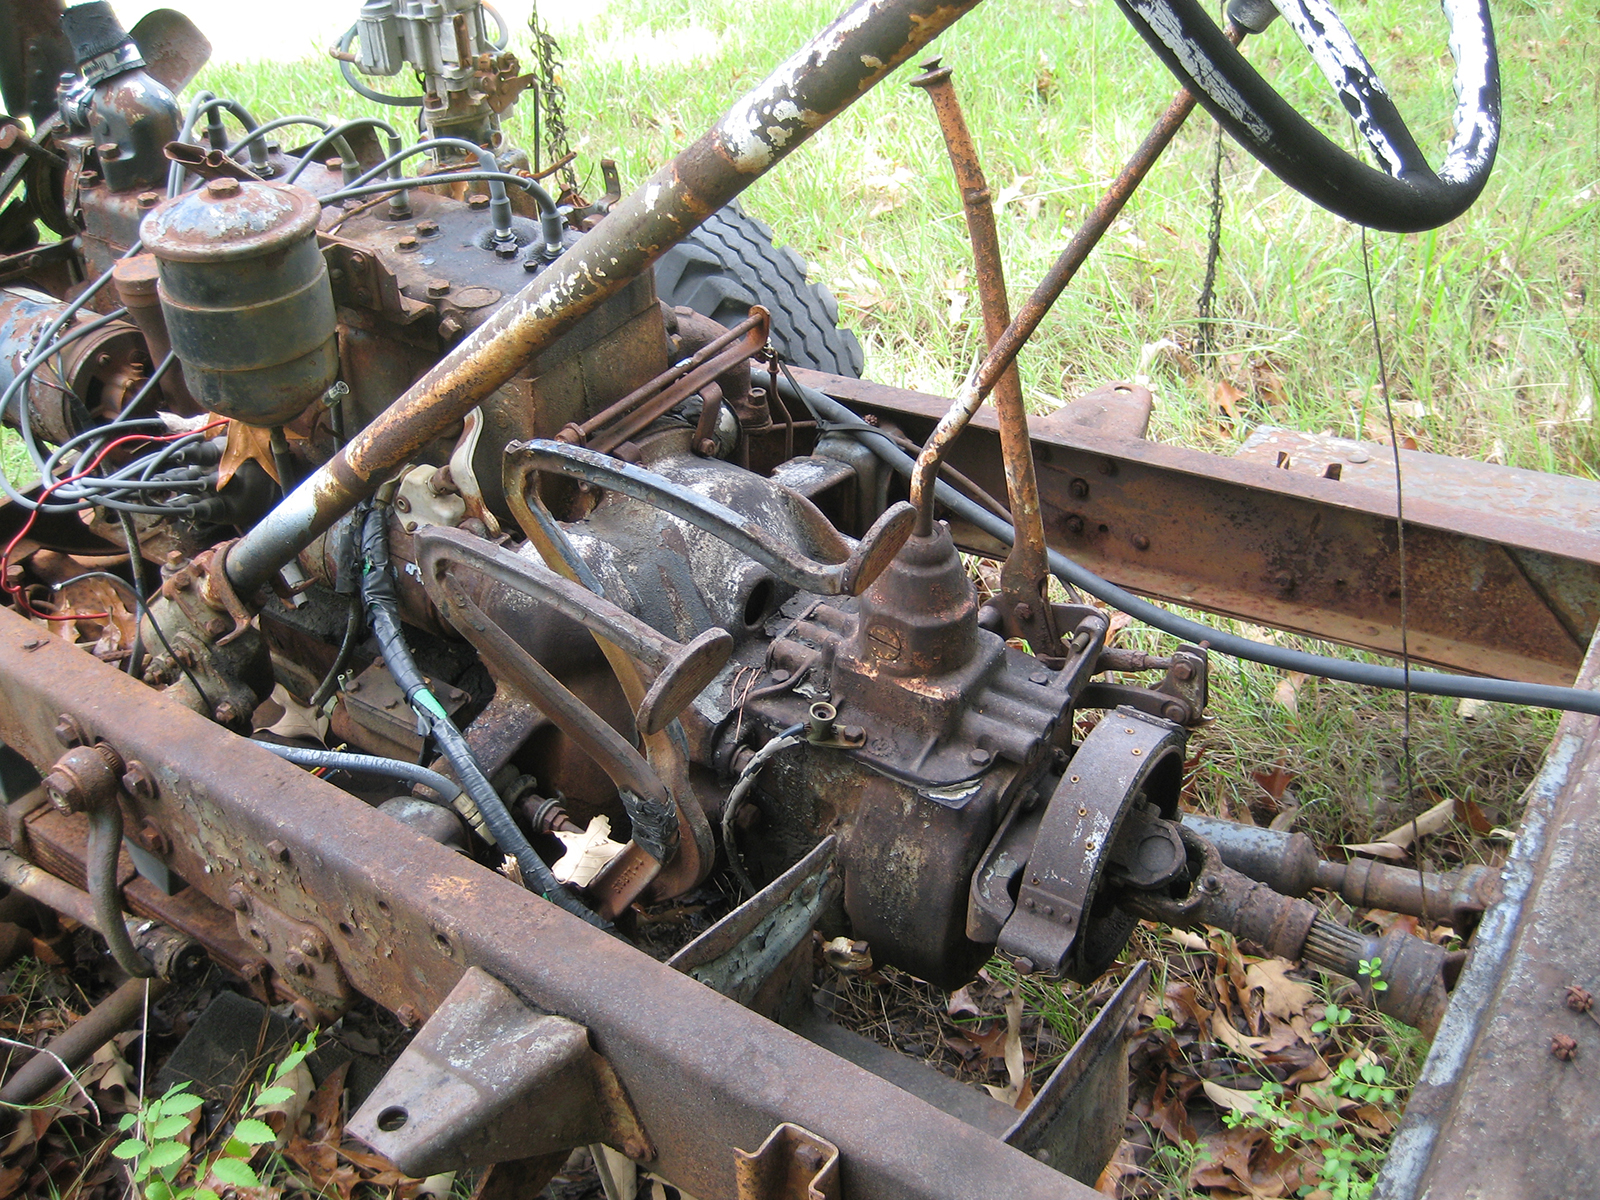 Rusted steering wheel and pedals with engine block and chassis of a 1941 Army Command Car.